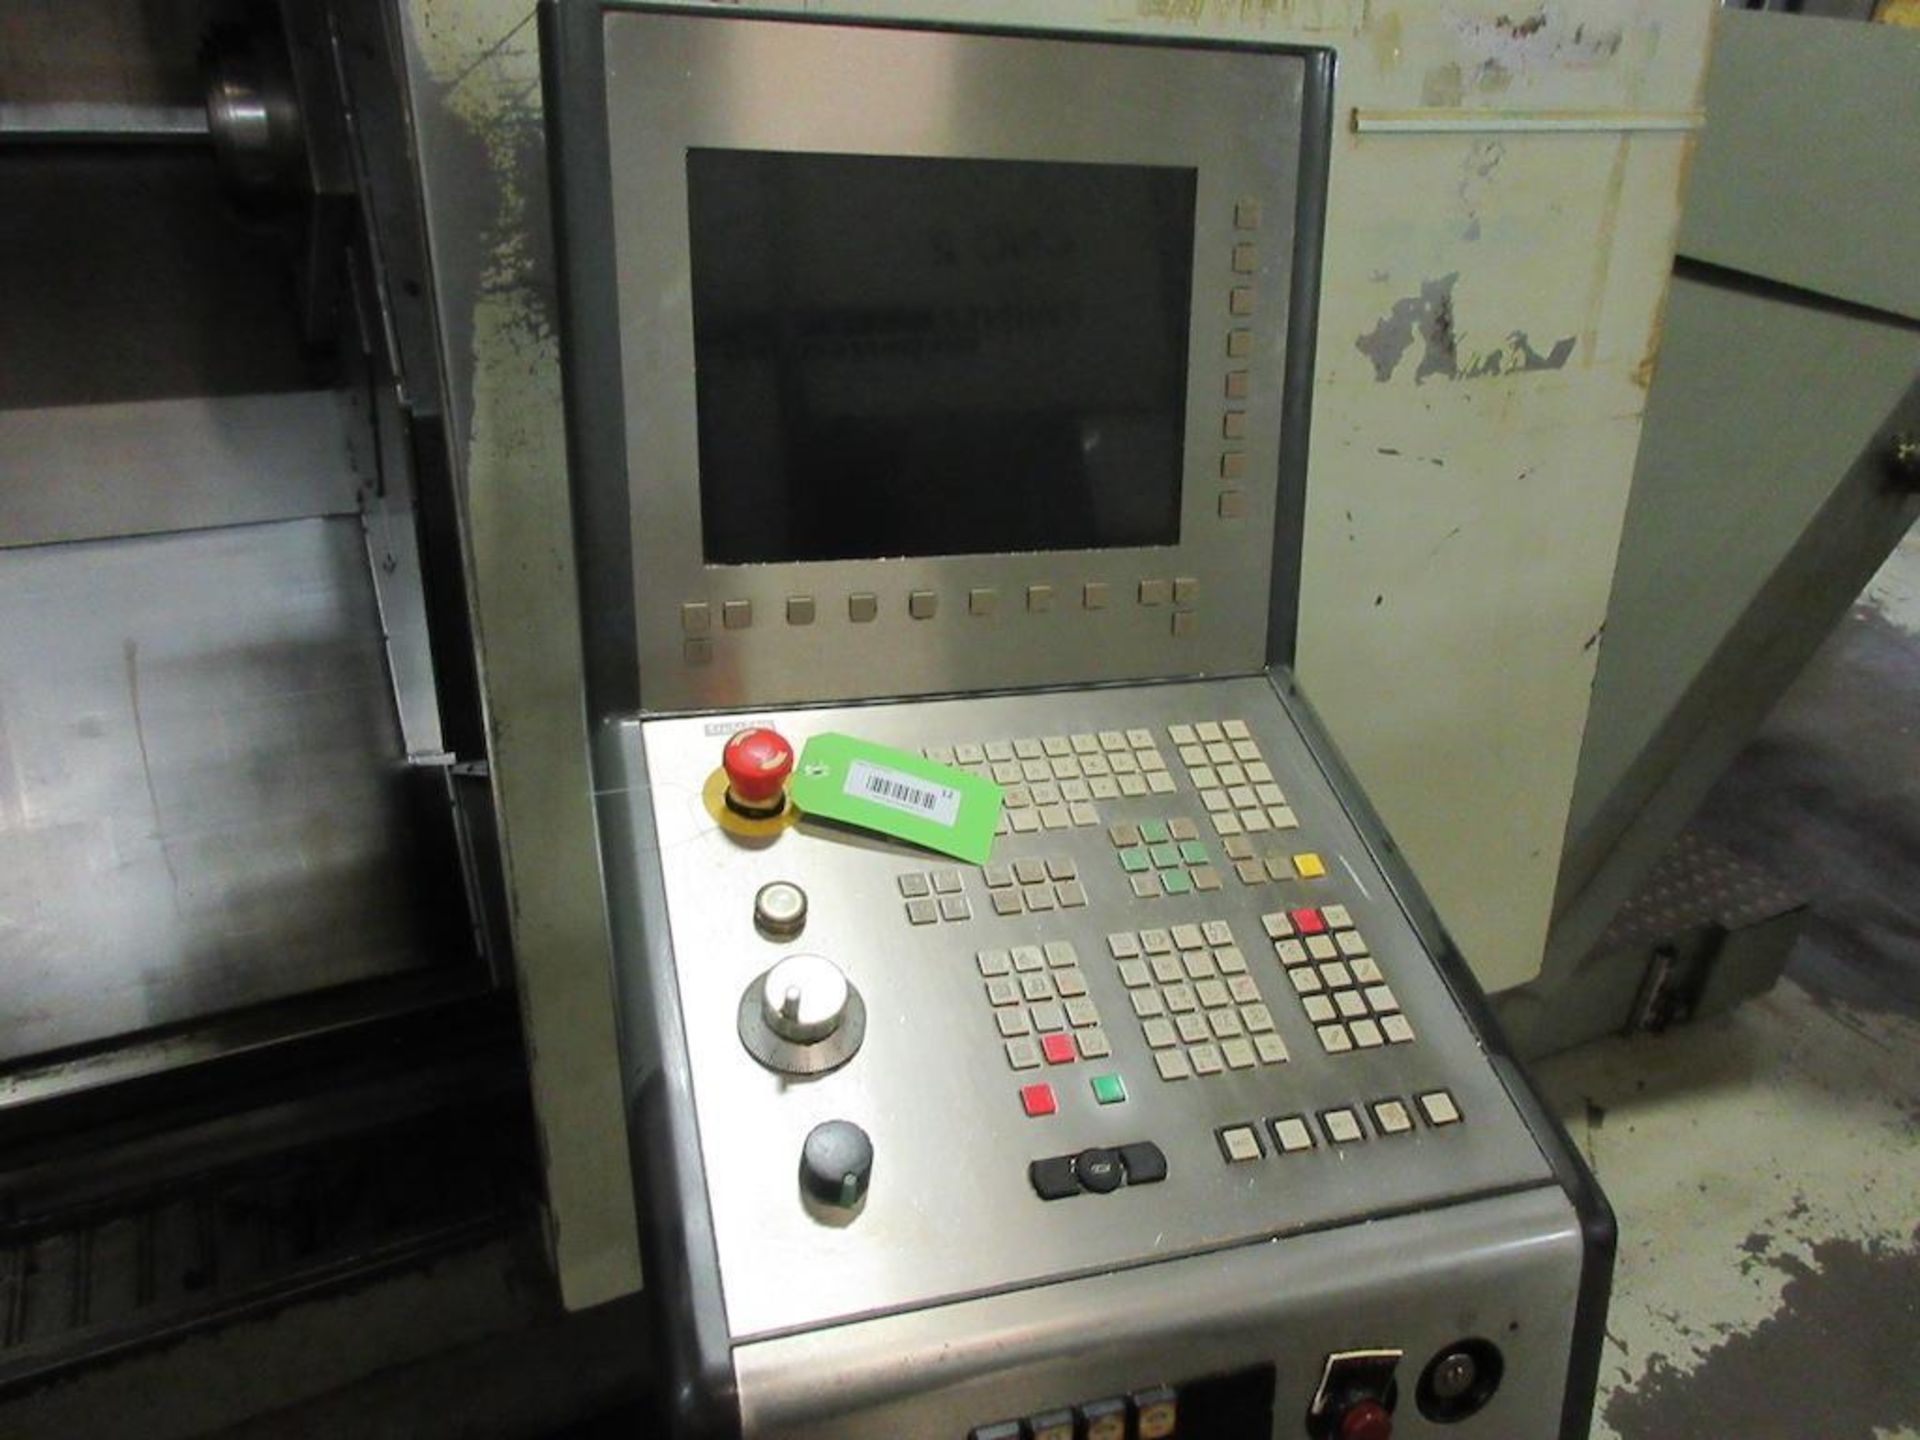 2006 DMG CNC Lathe, Model Twin 42, Twin Spindle, 4 Axis, CNC Control, B-Axis, Swing Diameter 5.7Ó, - Image 3 of 16